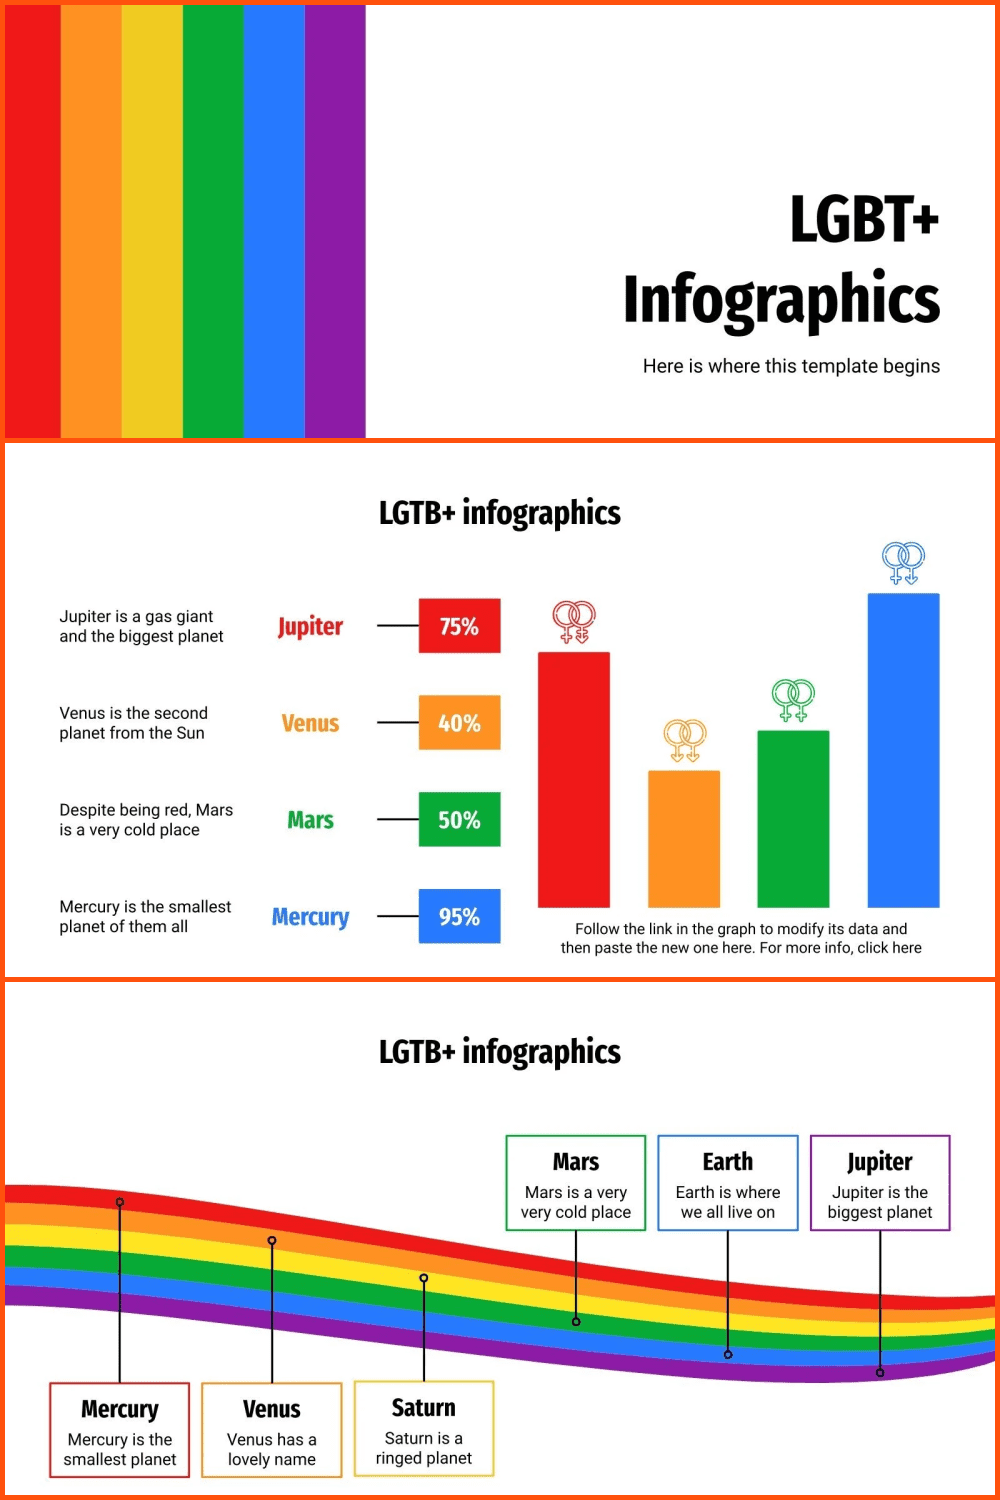 LGBT+ Infographics PPT Template.